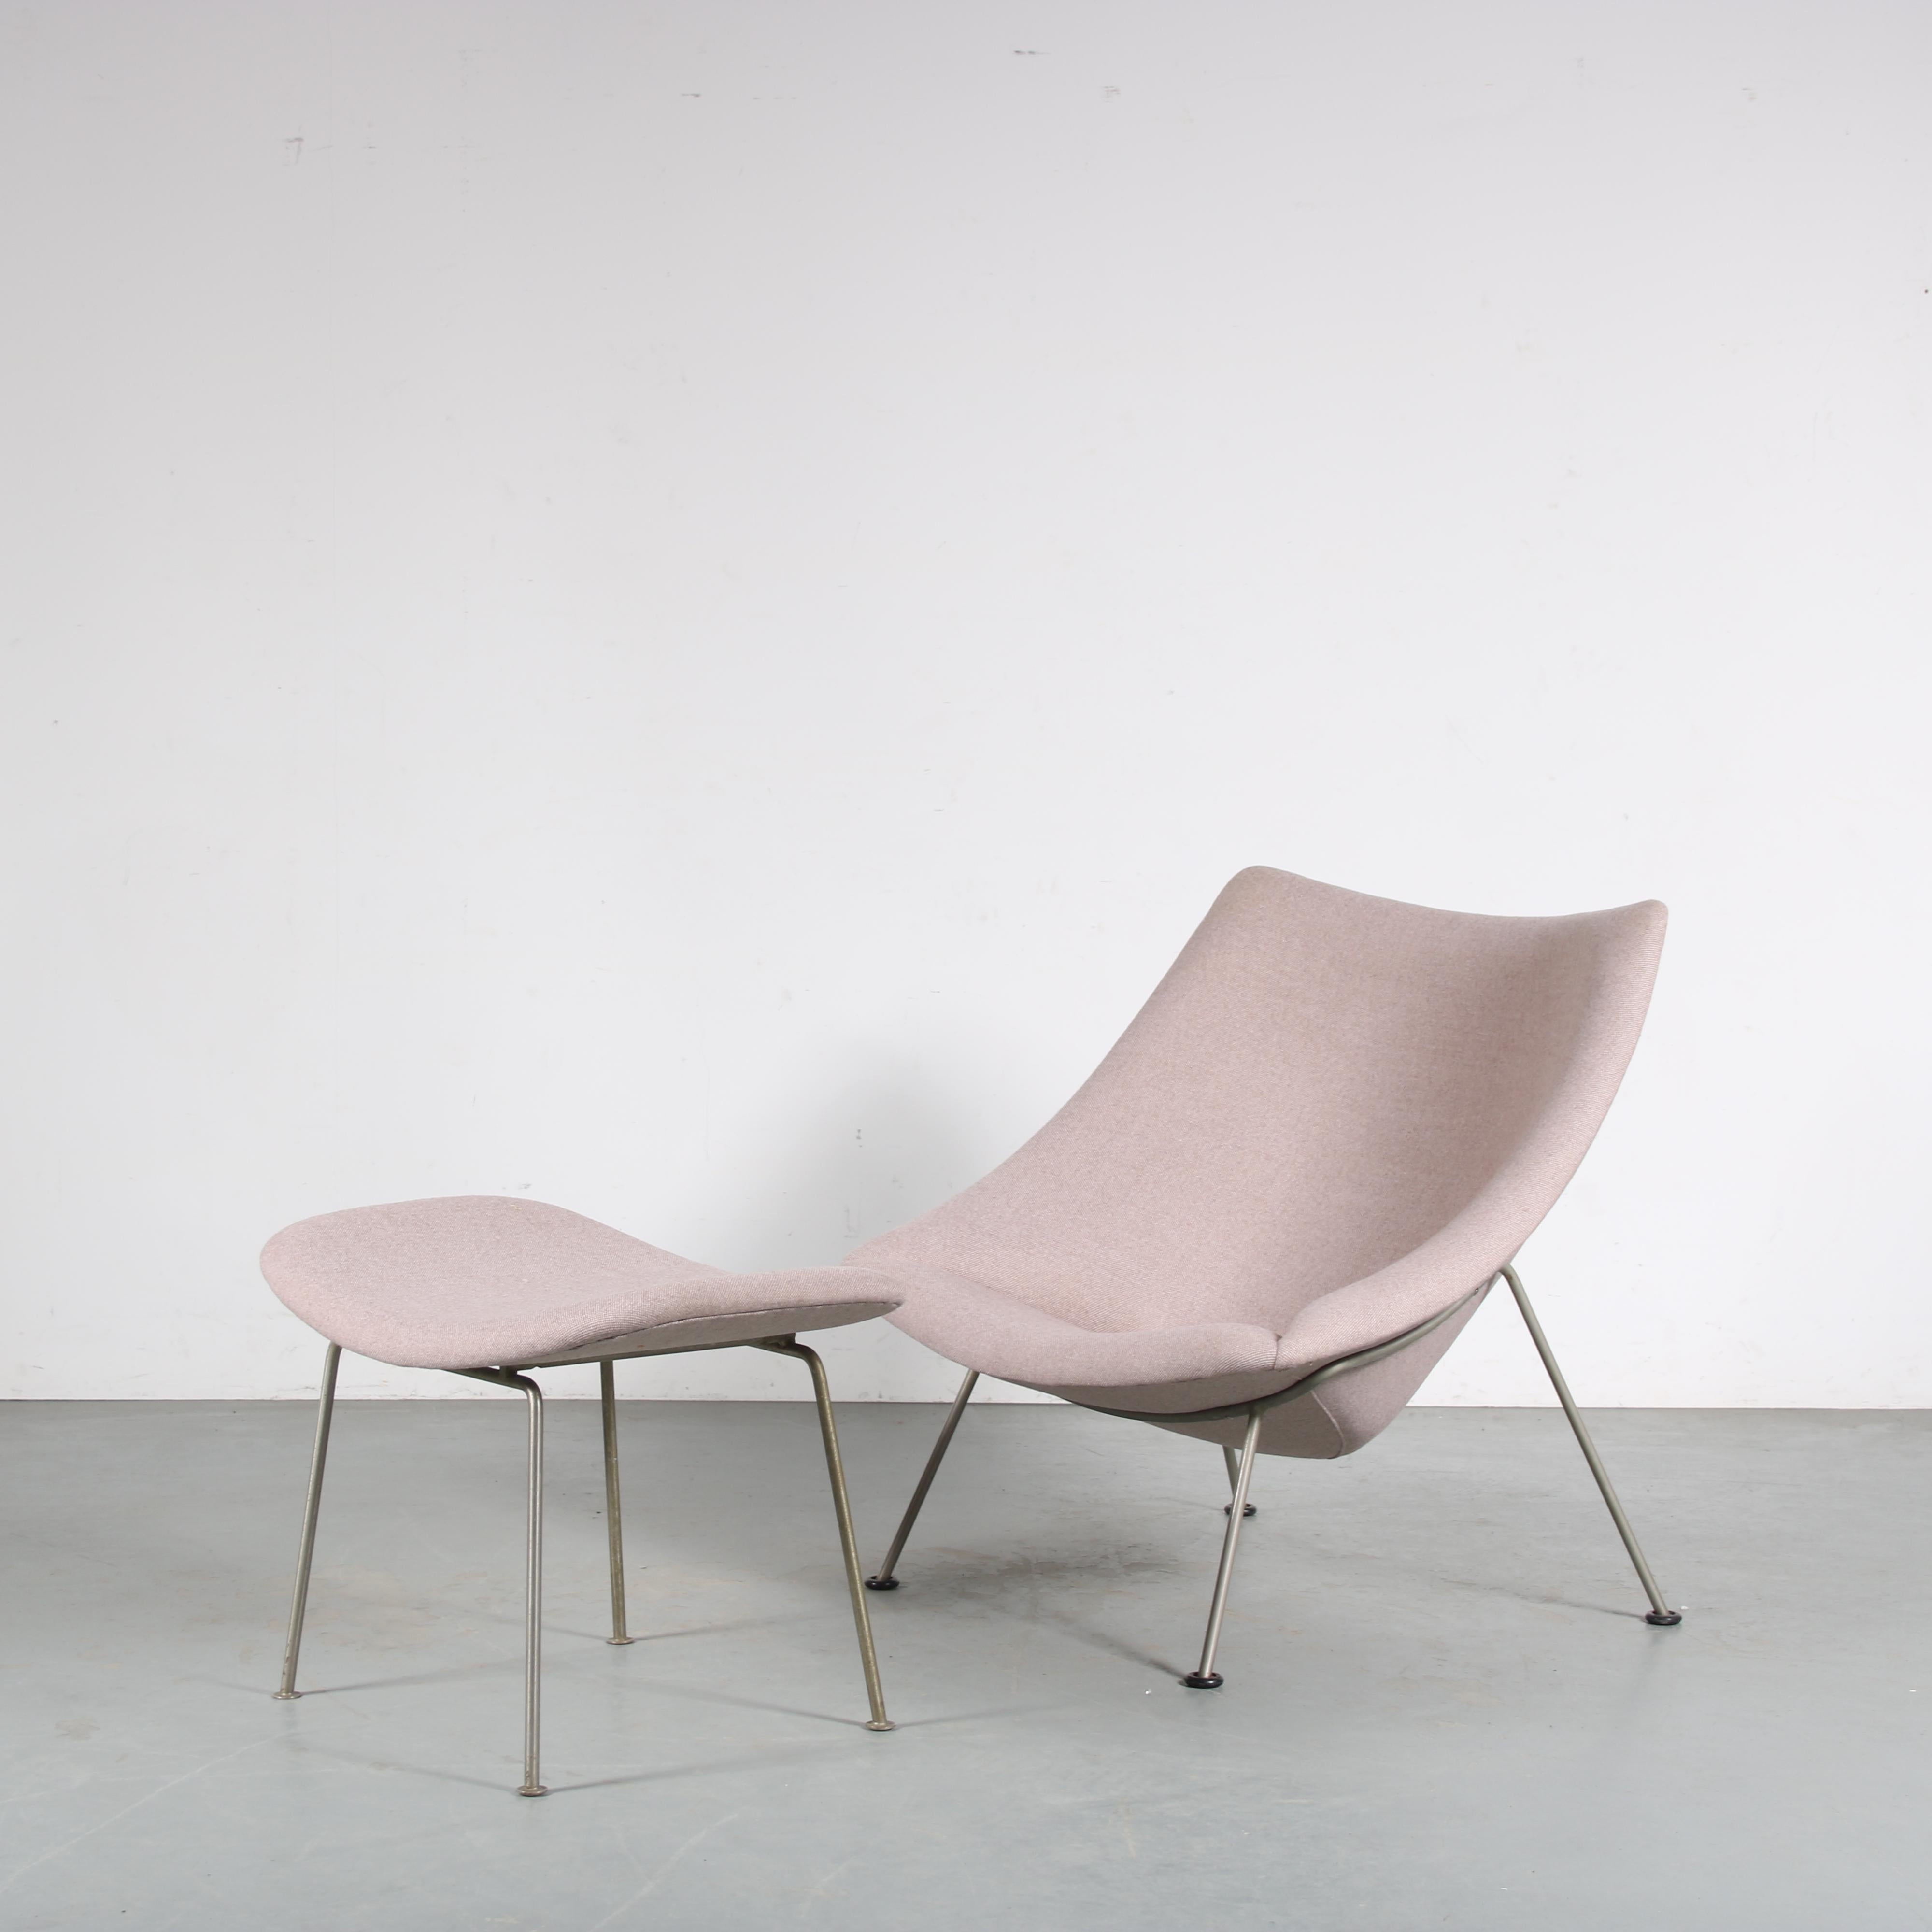 A beautiful set of one big “Oyster” lounge chair and matching foot stool, designed by Pierre Paulin and manufactured by Artifort in the Netherlands around 1950.

This elegant chair has a narrow metal base and a nicely curved seat, newly